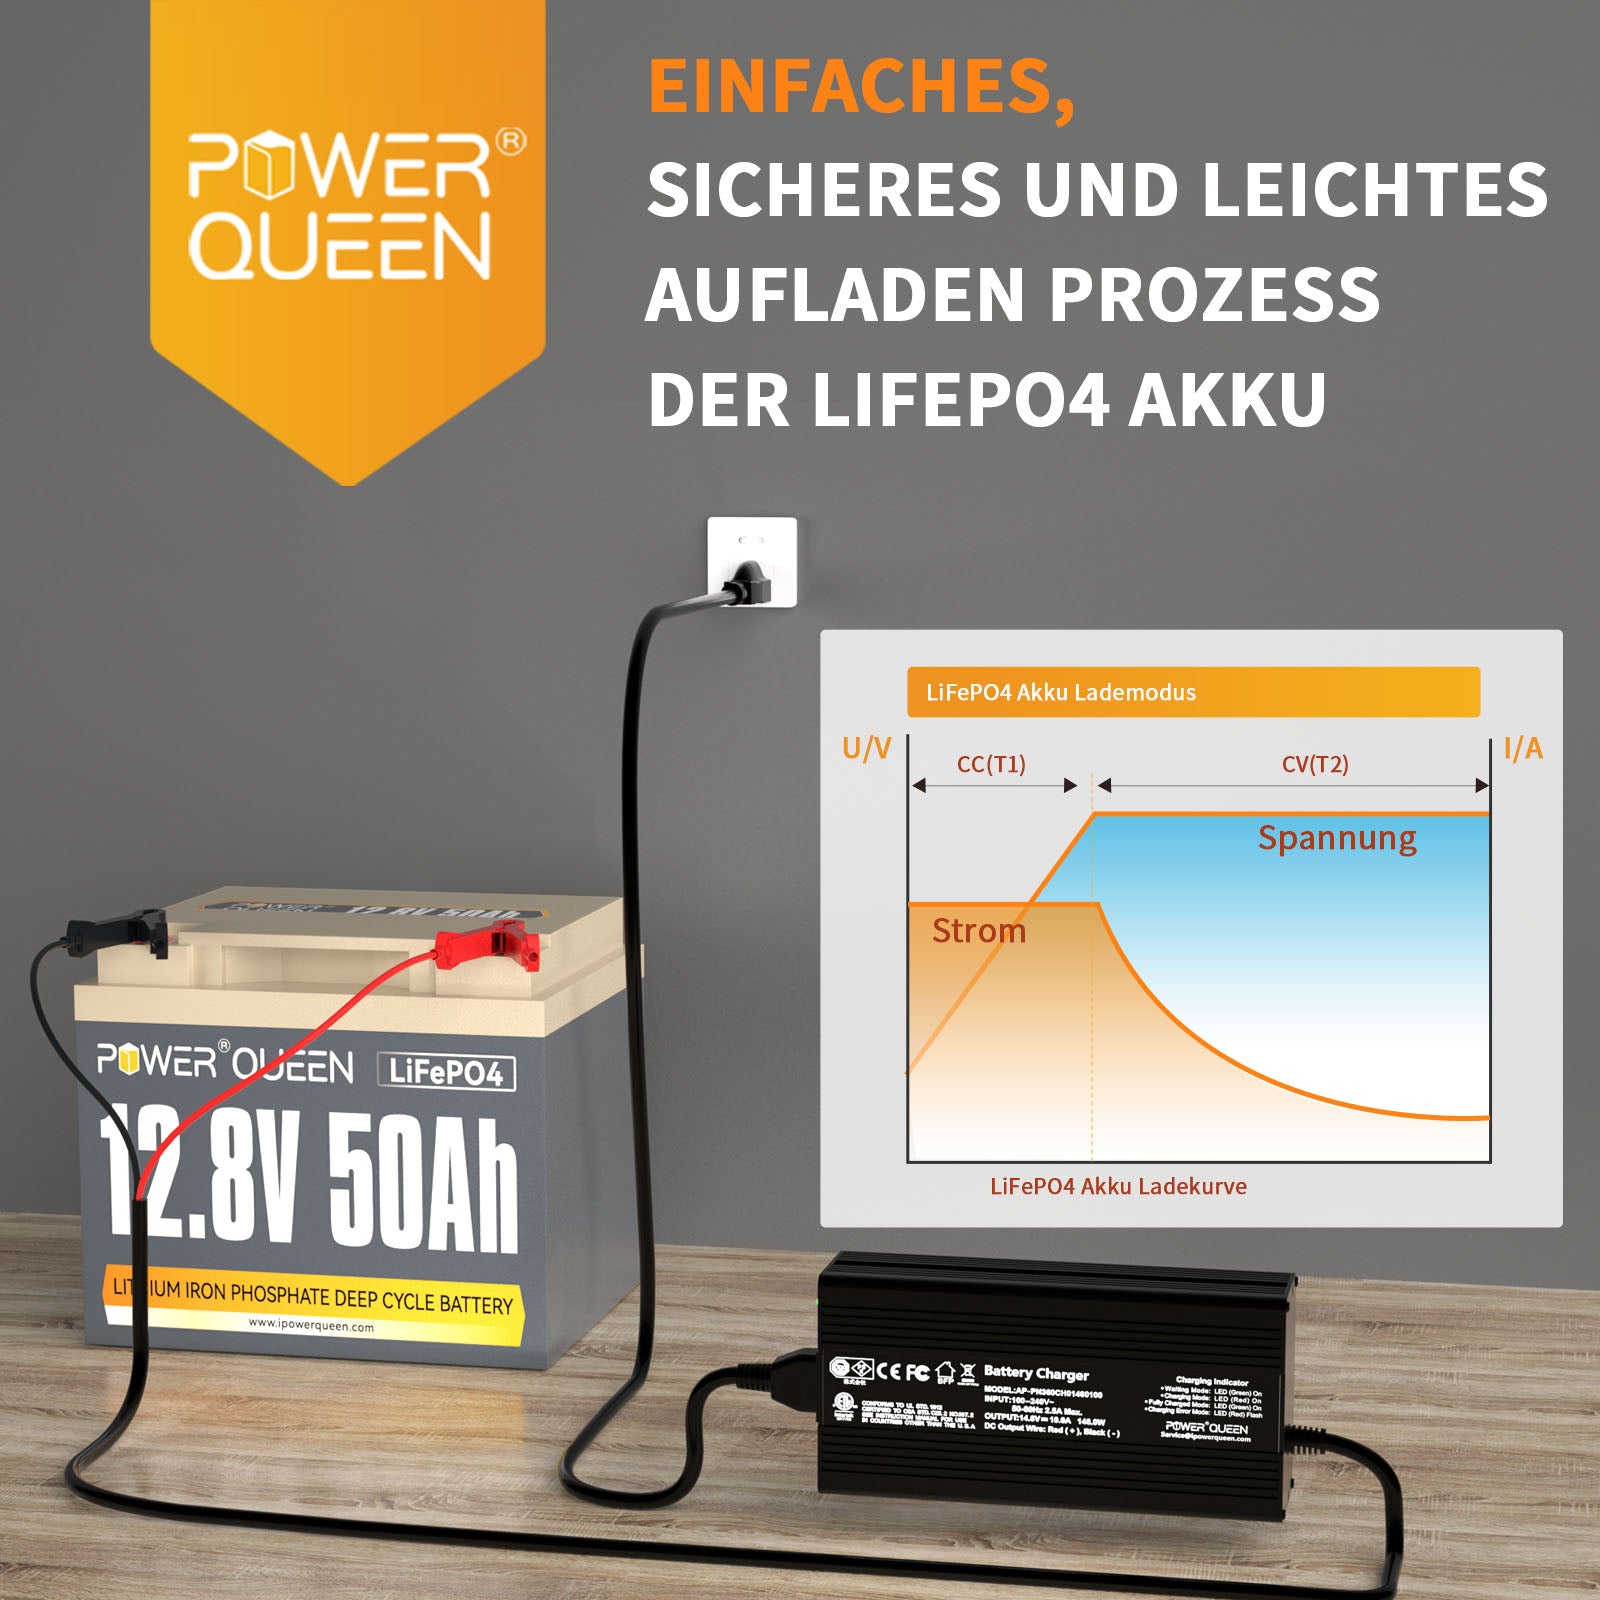 Batterie Power Queen 12,8 V 50 Ah LiFePO4 avec chargeur 14,6 V 10 A LiFePO4